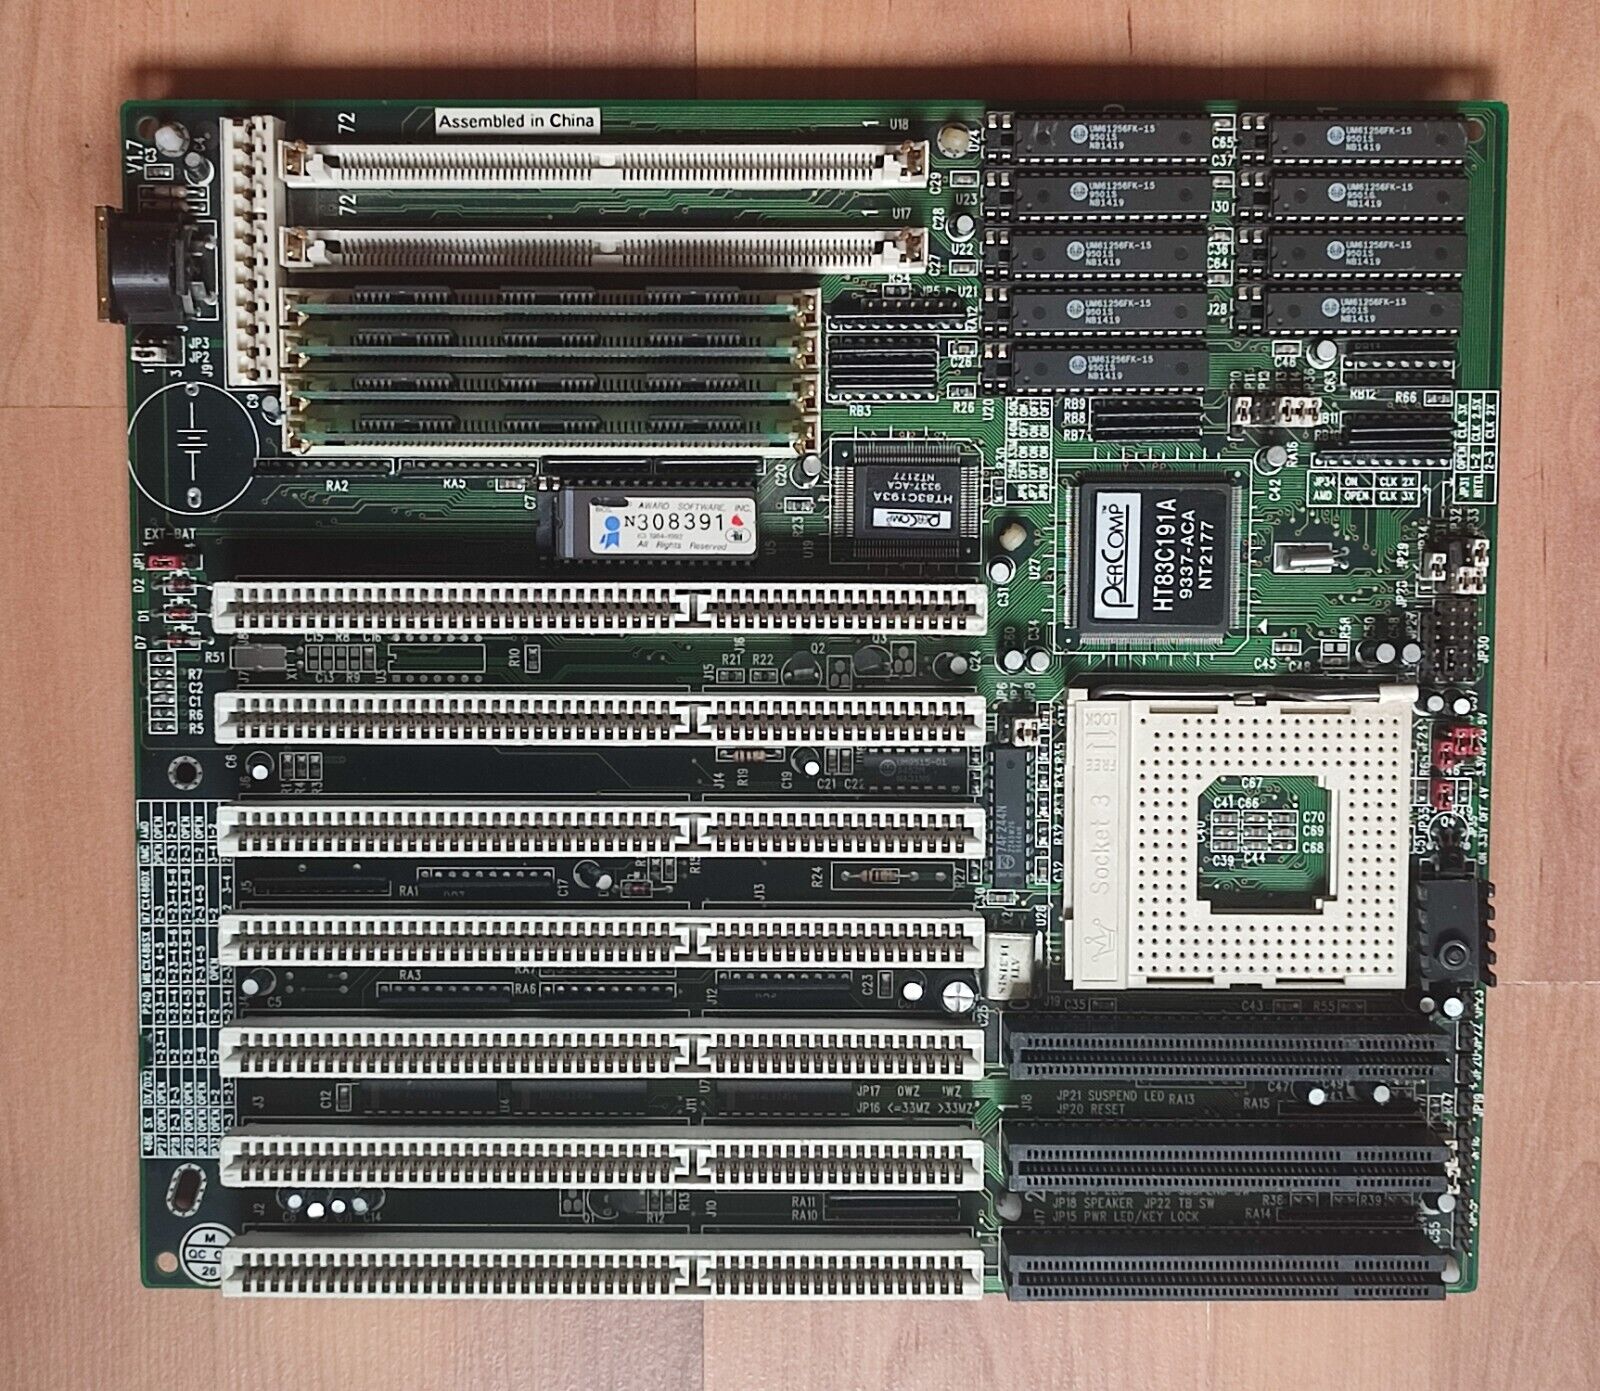 EXTREMELY RARE PERCOMP Socket 3 Motherboard- HT83C191A + Memory - 1996 year 